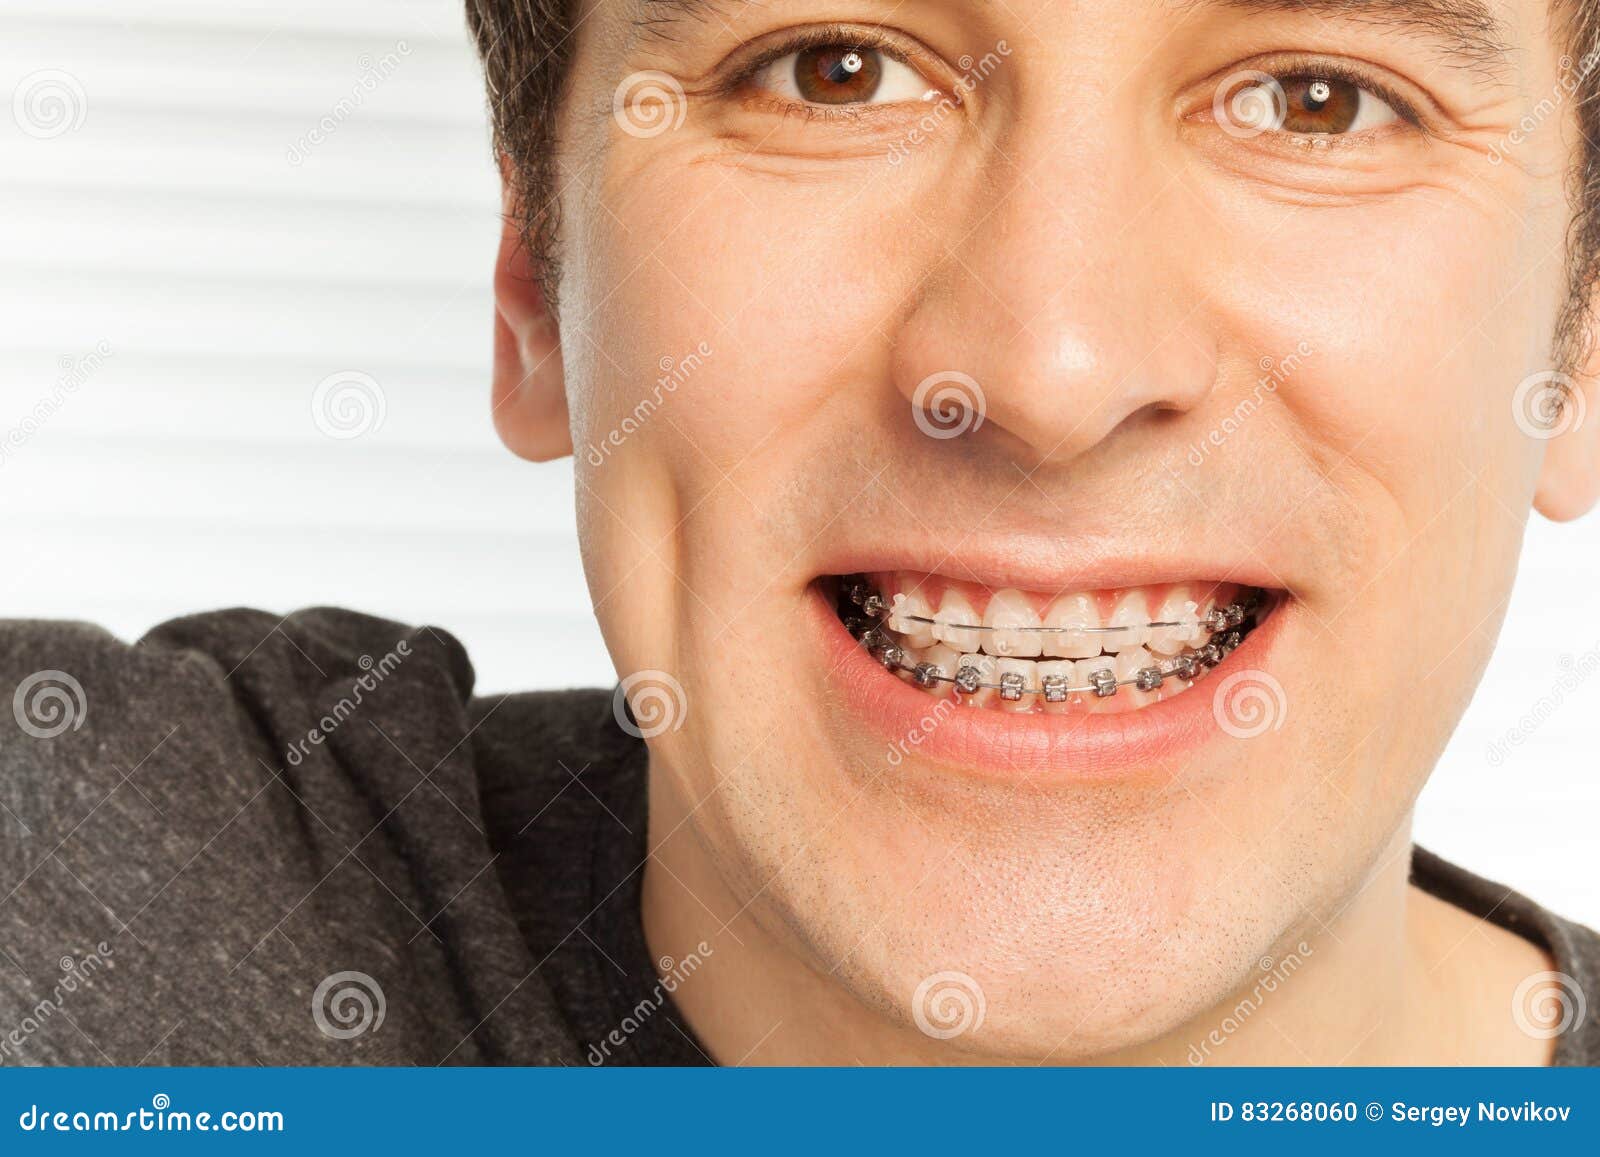 young man with dental braces on his teeth